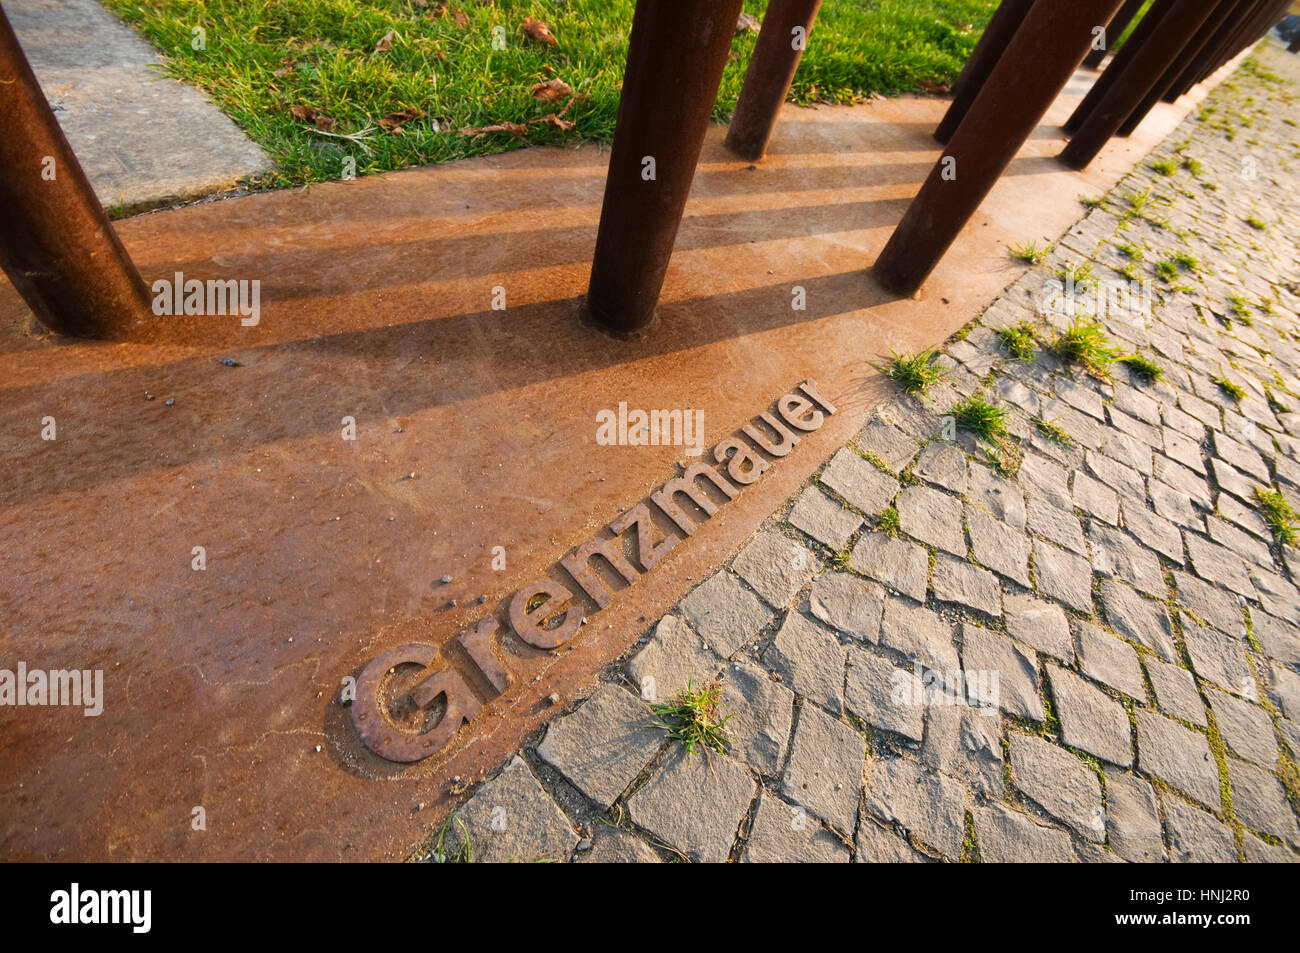 Performing detailed view of the former borders of the Berlin wall. Stock Photo